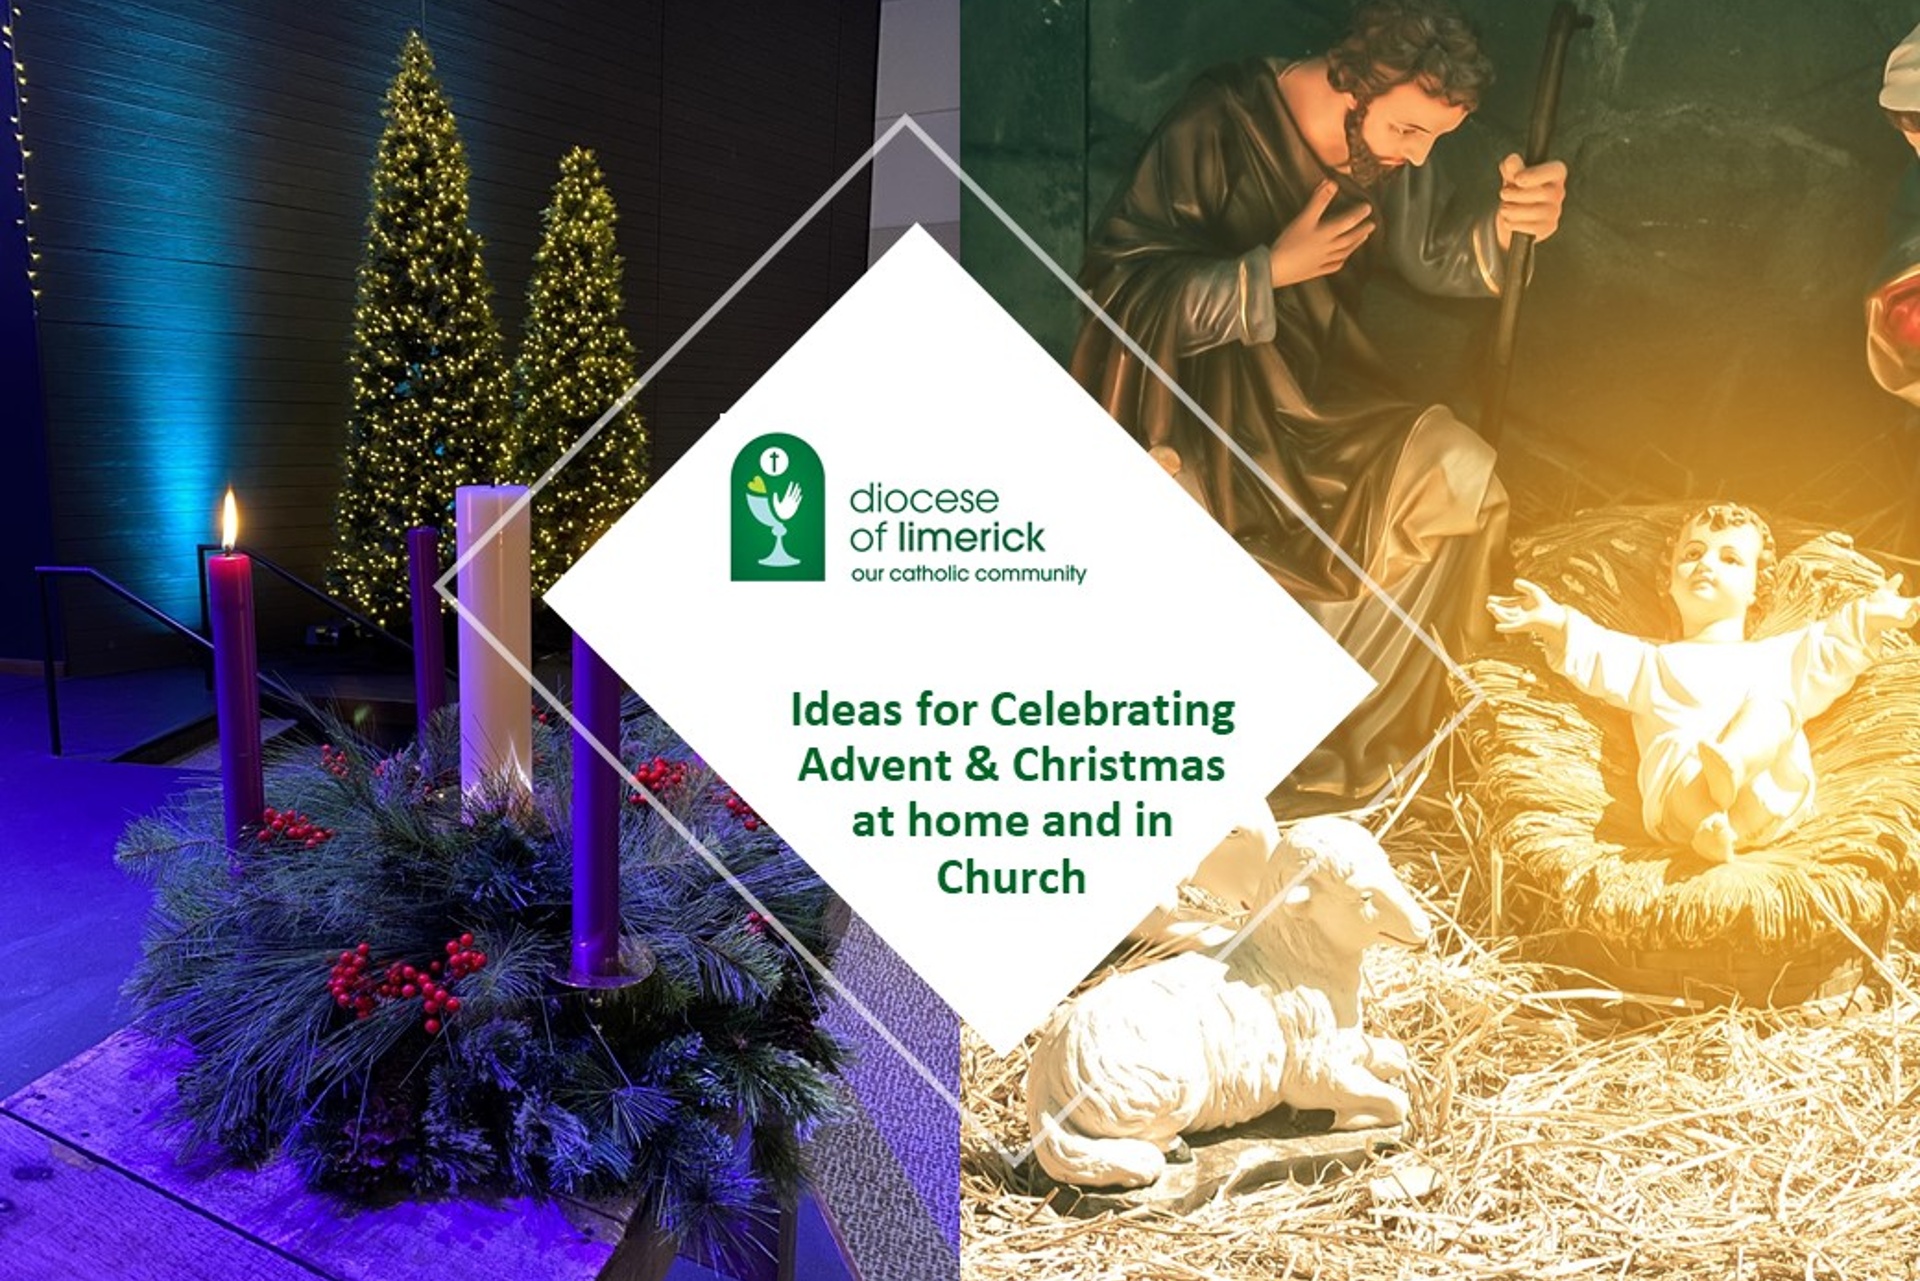 Resources for Advent and Christmas 2020